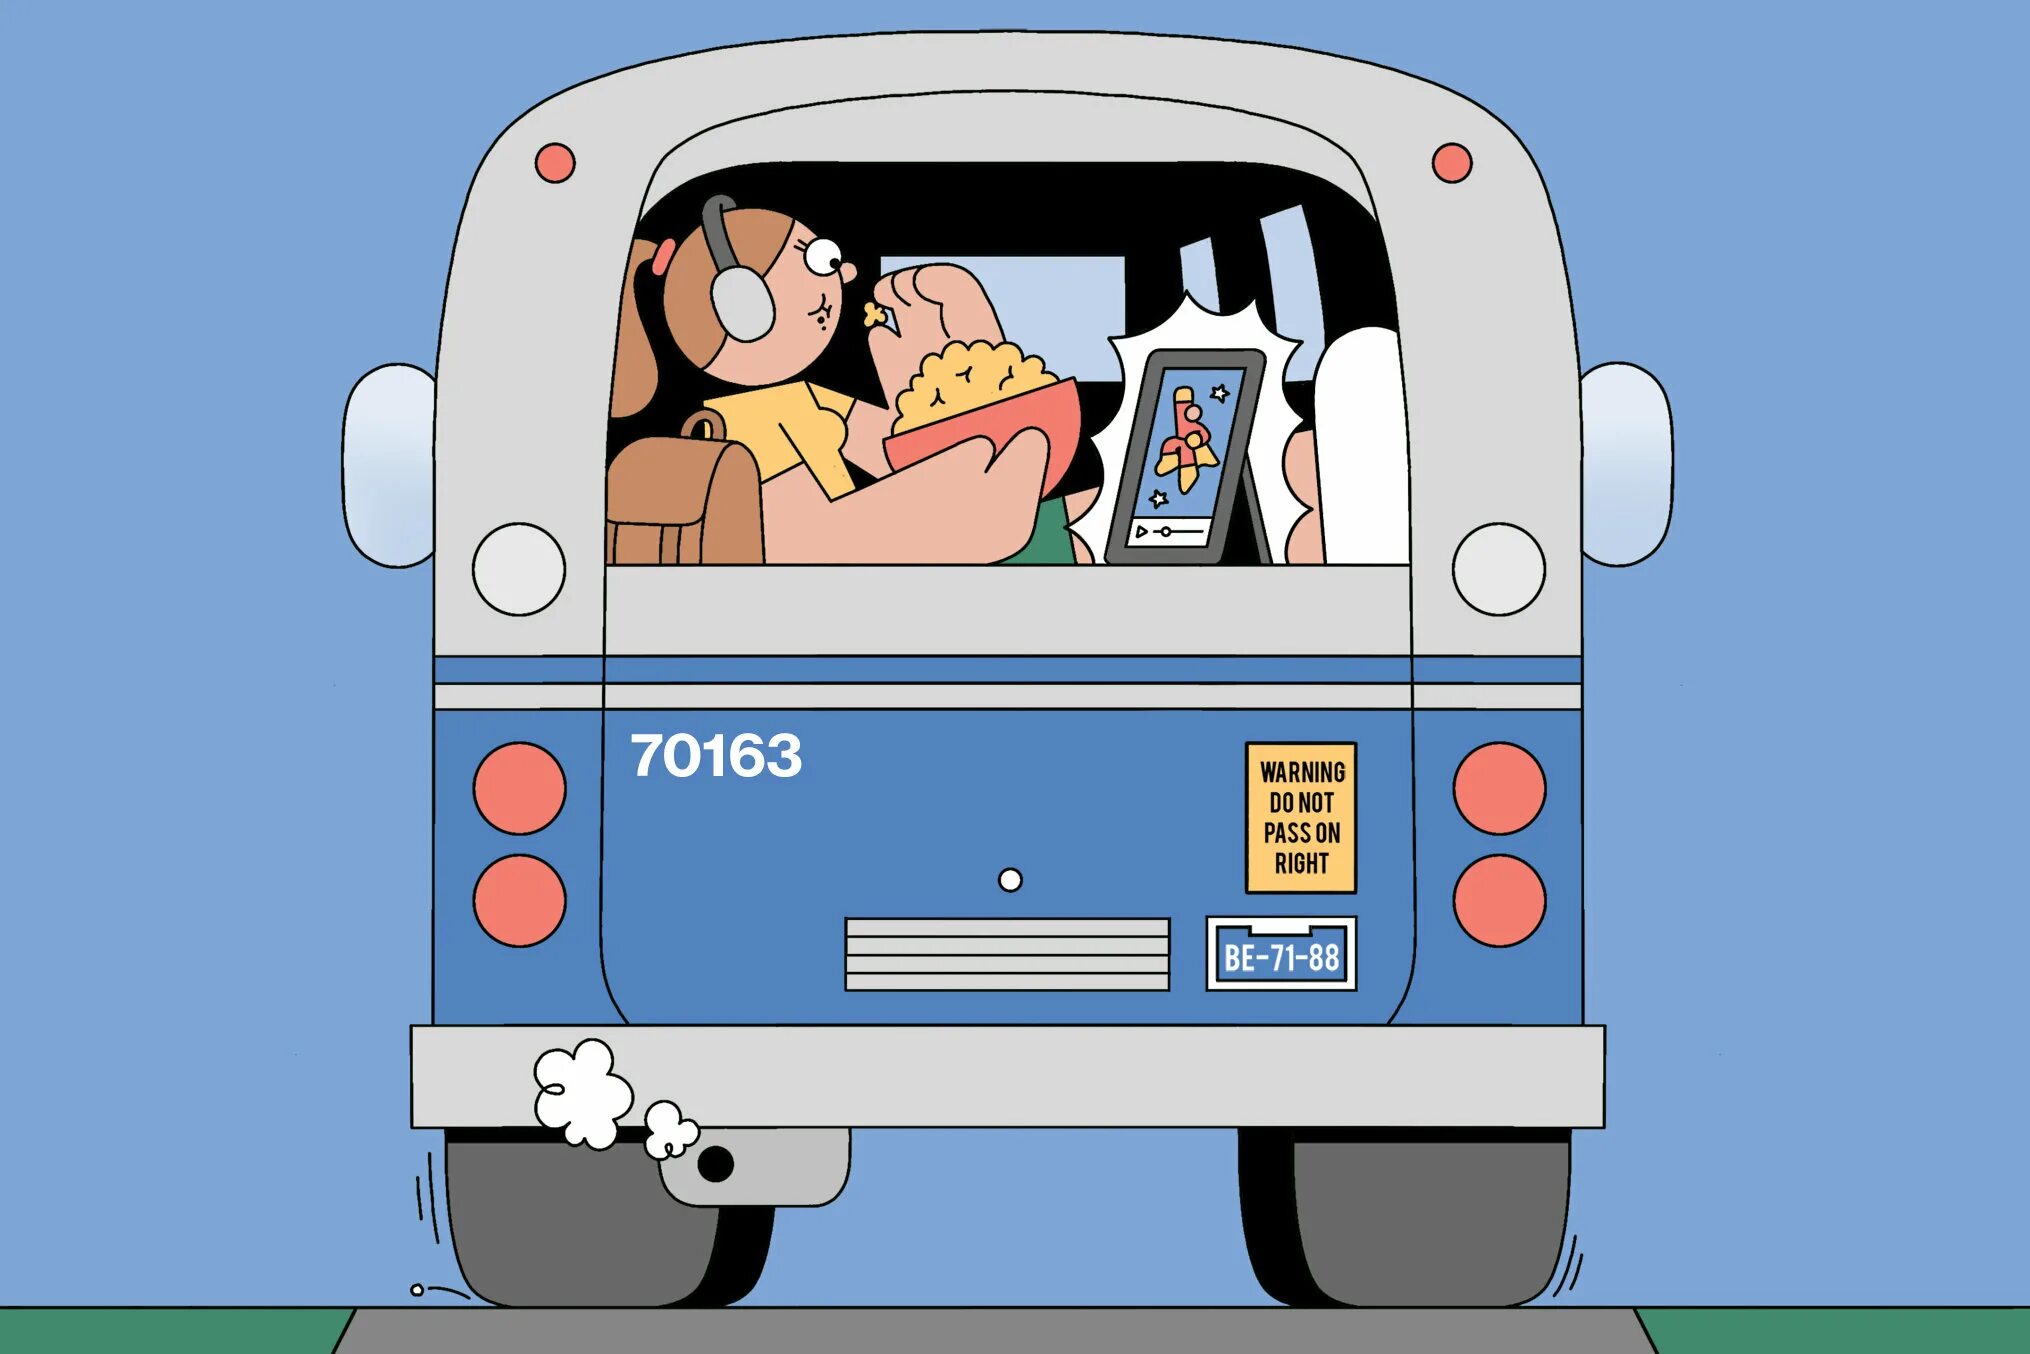 They go to work by bus. Dan Woodger. Commuting. Commuting cartoon.